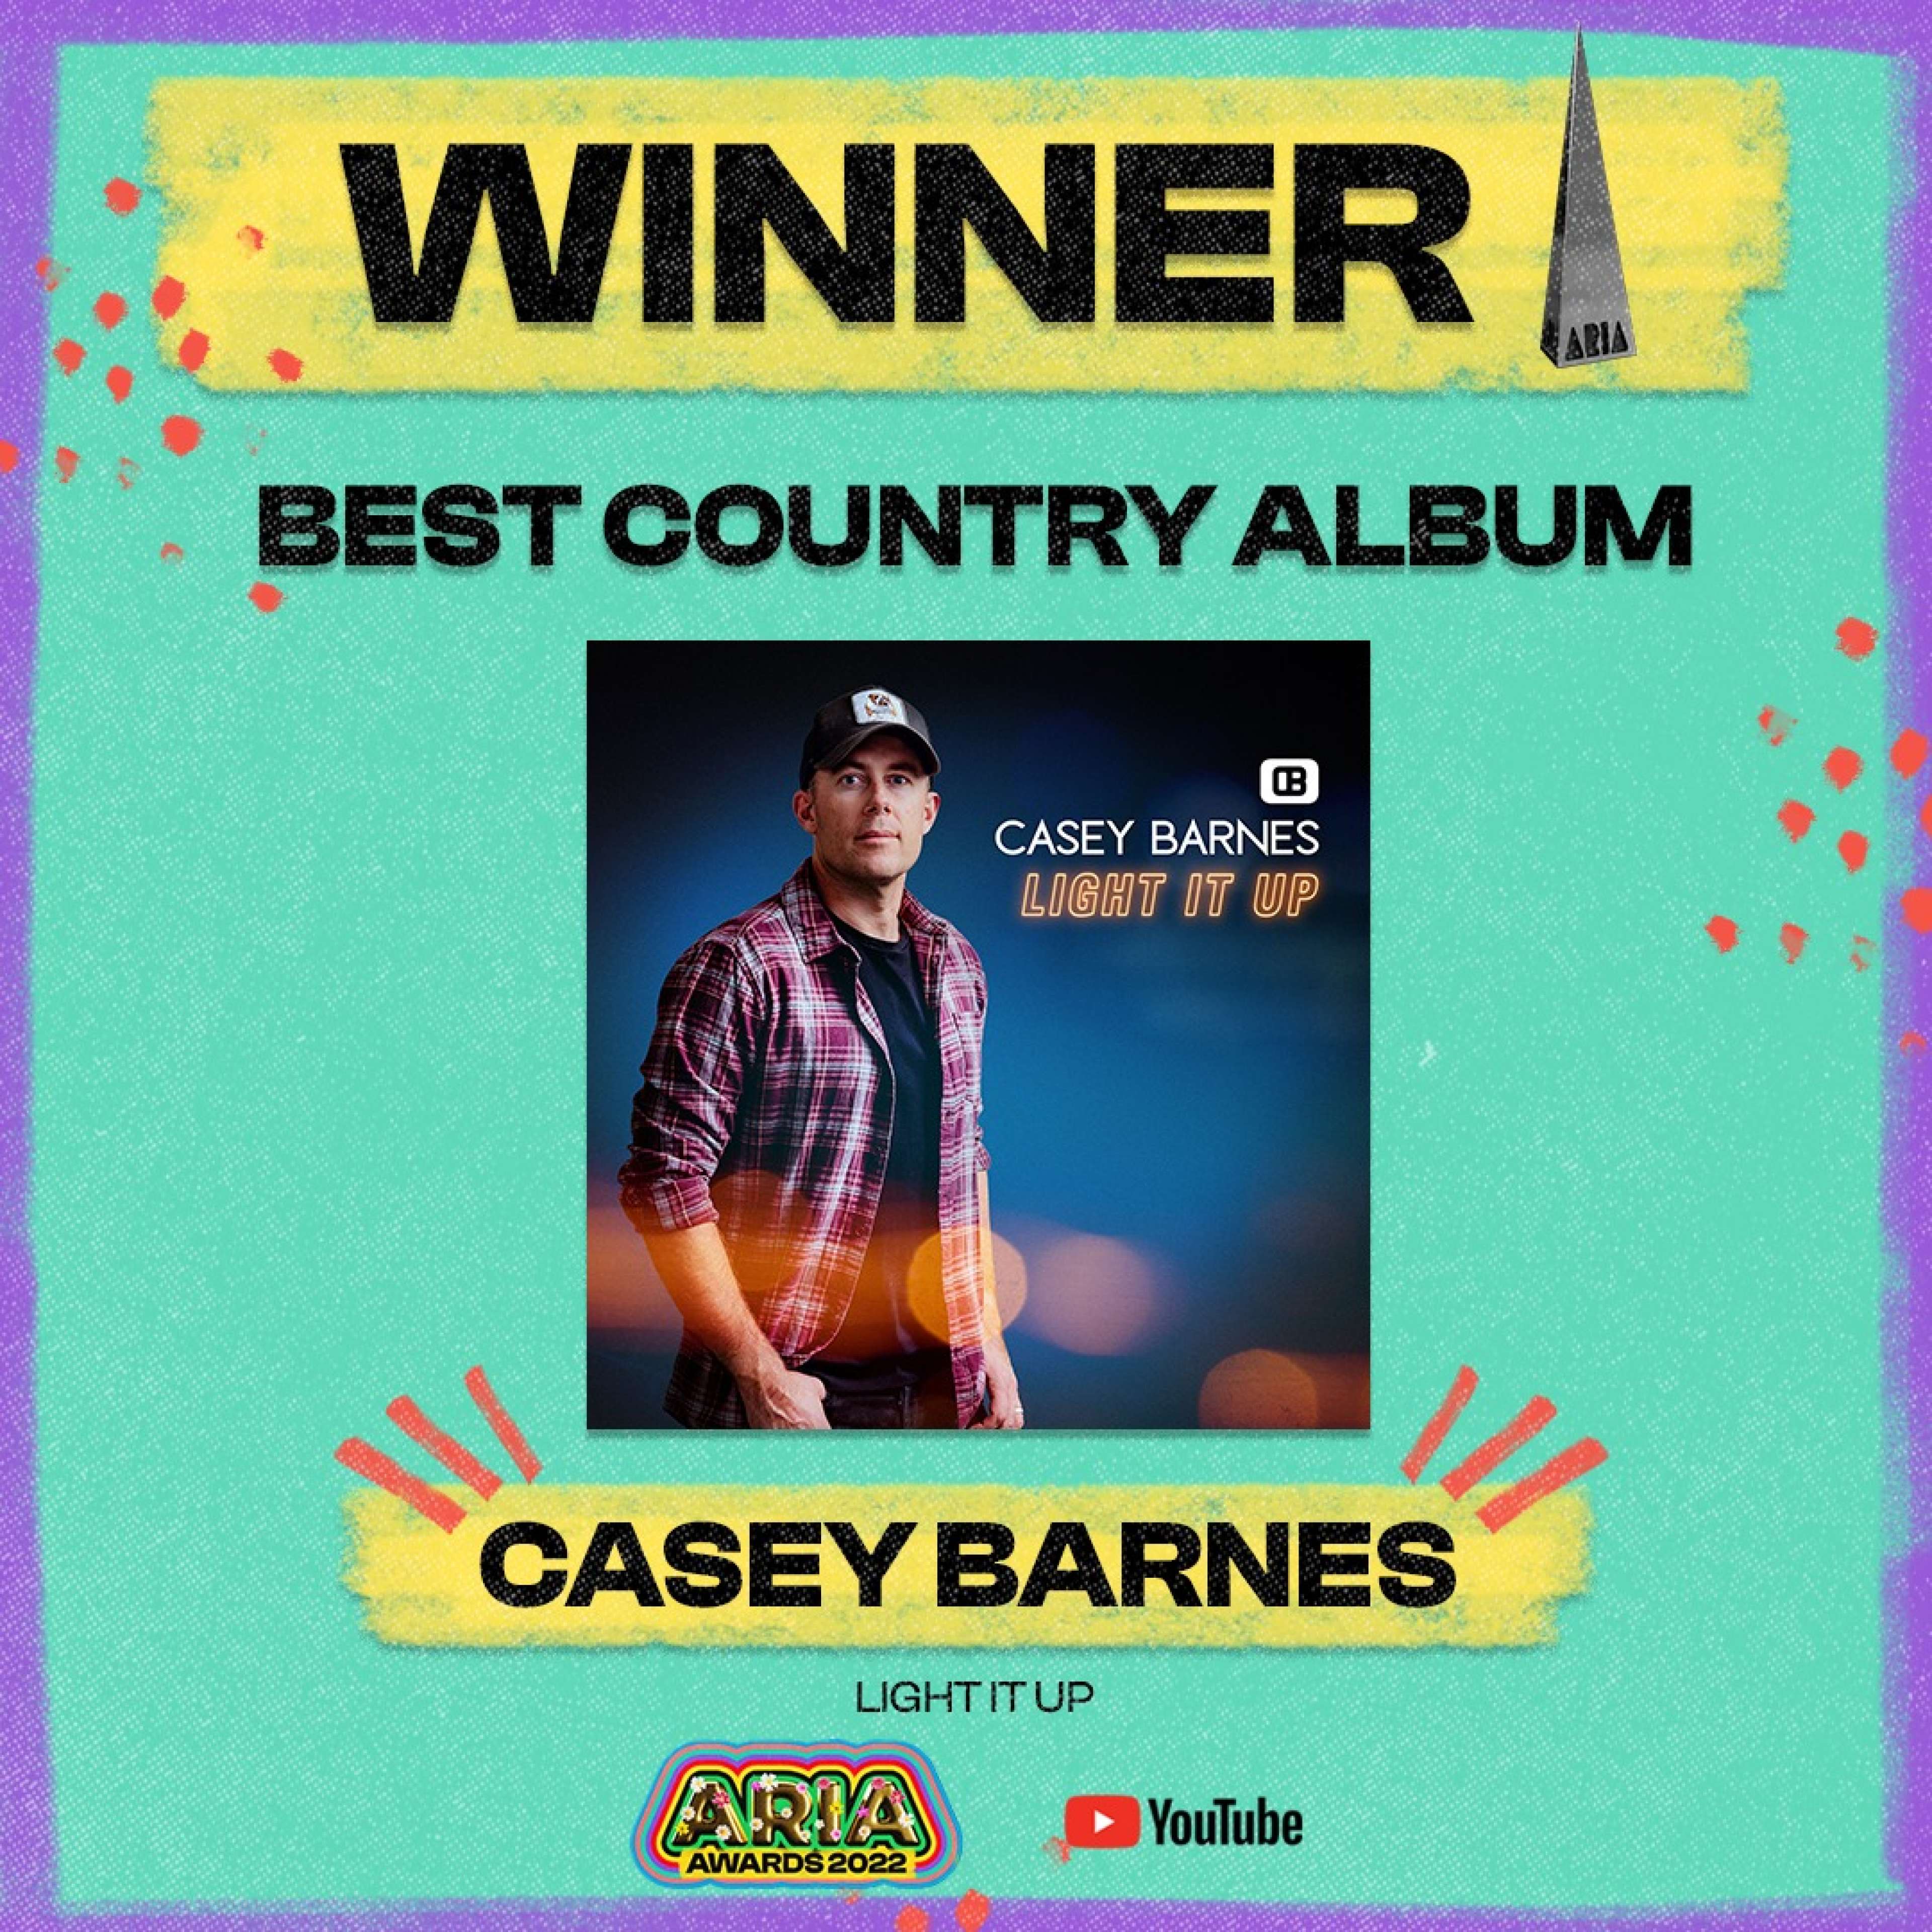 Casey Barnes wins ARIA Award for 'Best Country Album' - 